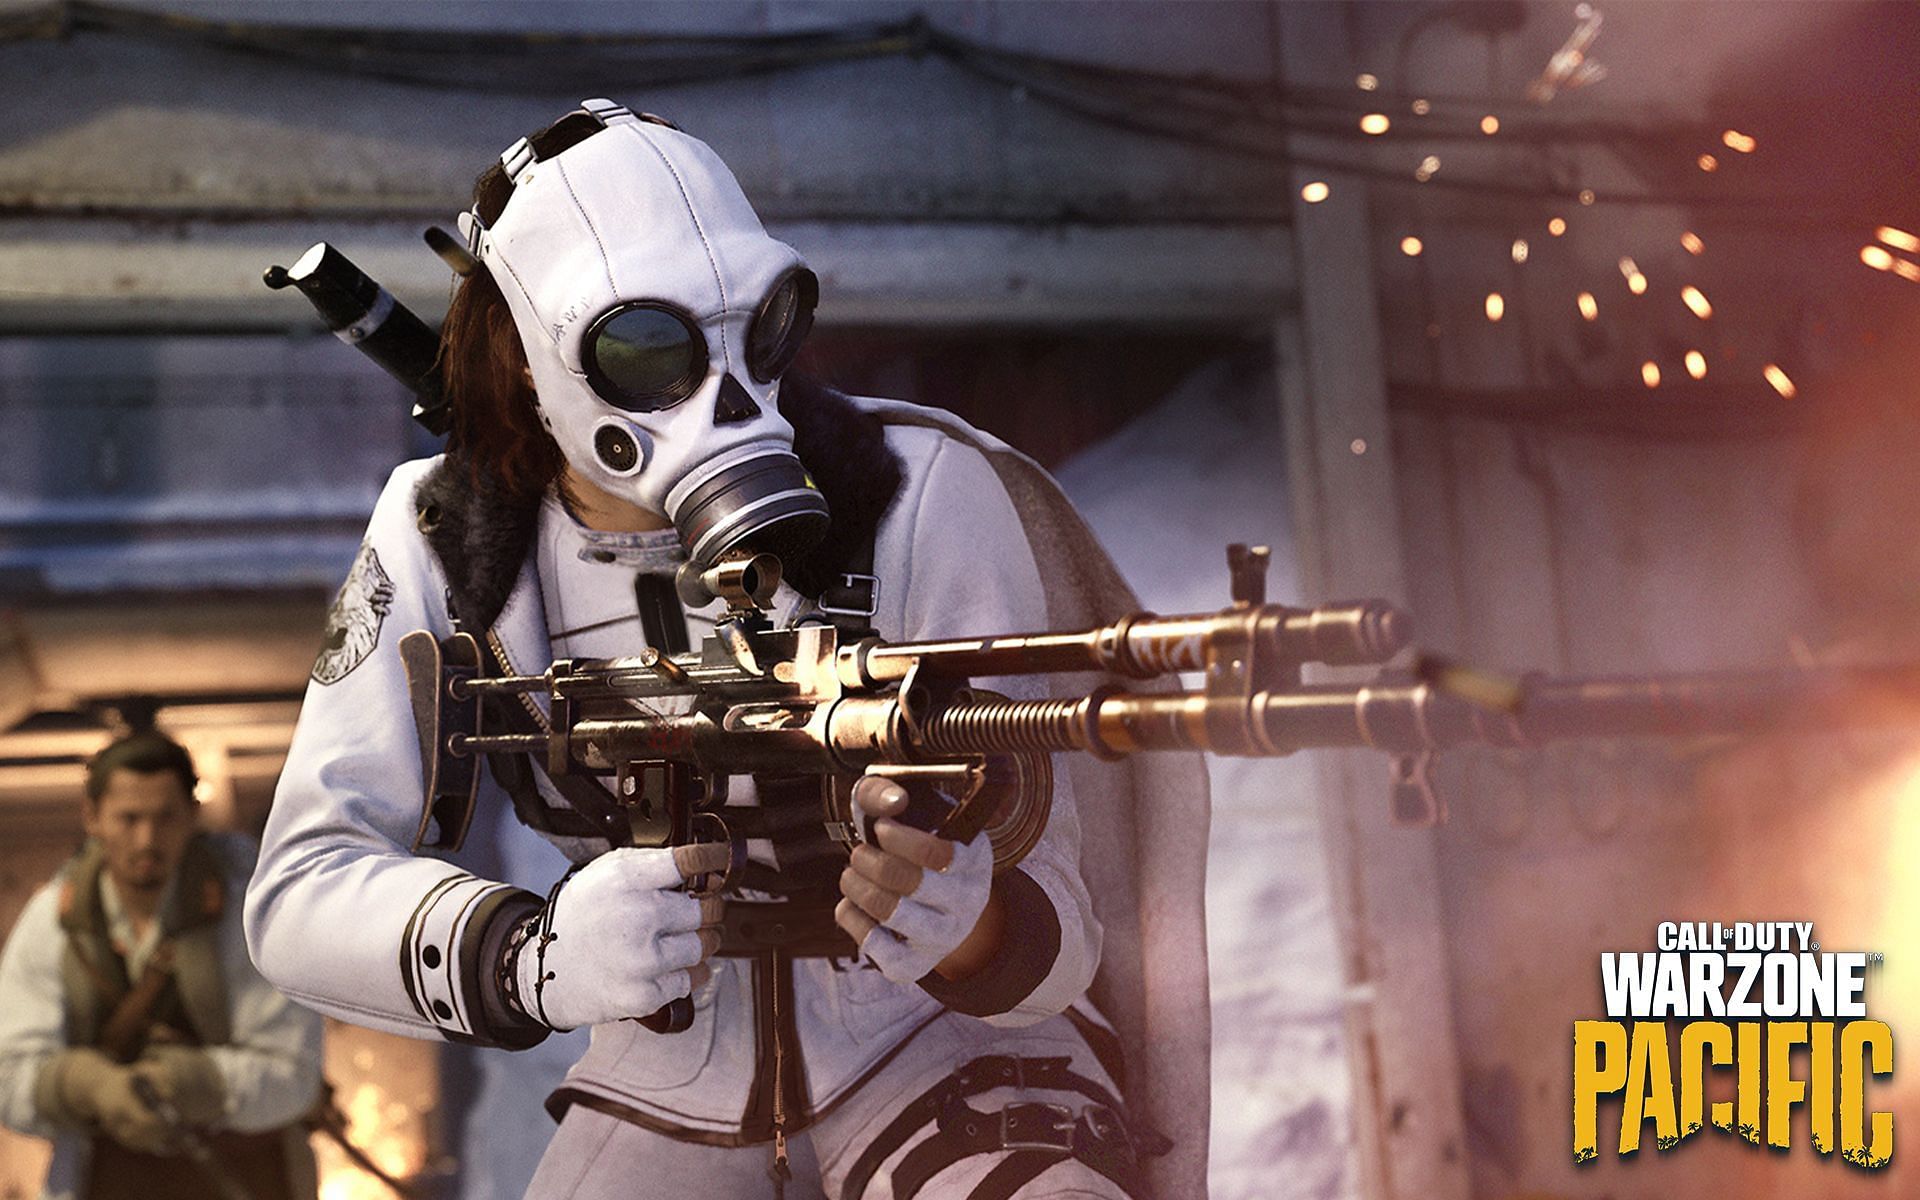 Call of Duty: Warzone Pacific Season Two is now out for players to enjoy (Image via Activision)